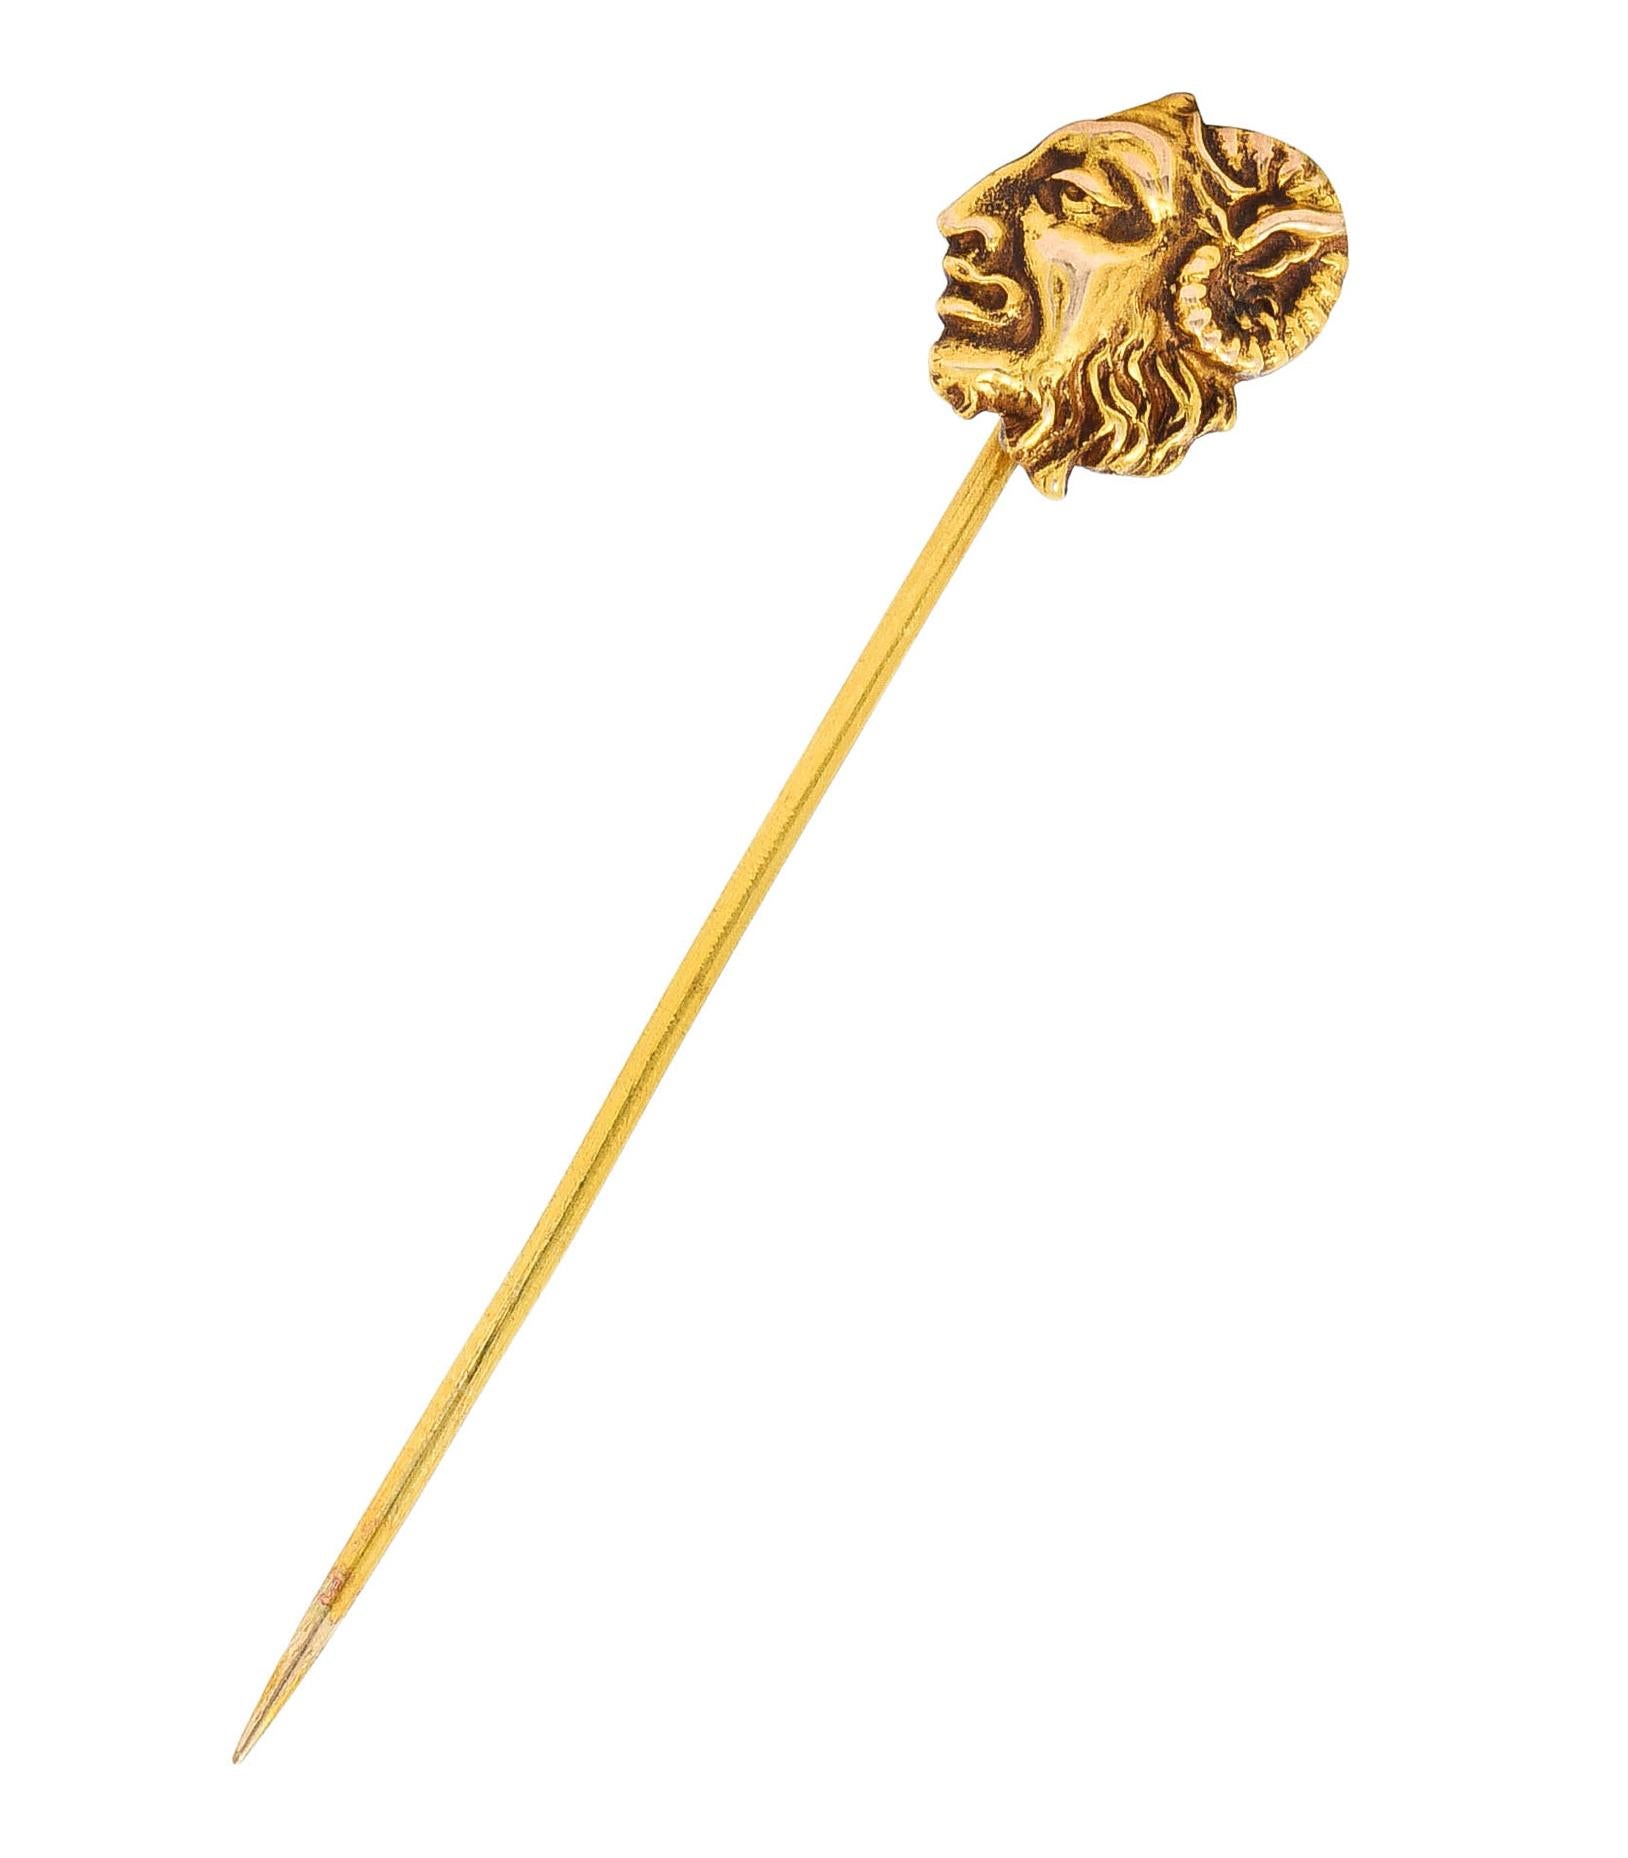 Stickpin designed as profile of Pan - god of the wild

Accented by stylized face with textured hair and horns

Tested as 18 karat gold

Circa: 1905

Pan head: 1/2 x 1/2 inch

Total length: 2 3/8 inches

Total weight: 1.4 grams

Mischief. Lore.